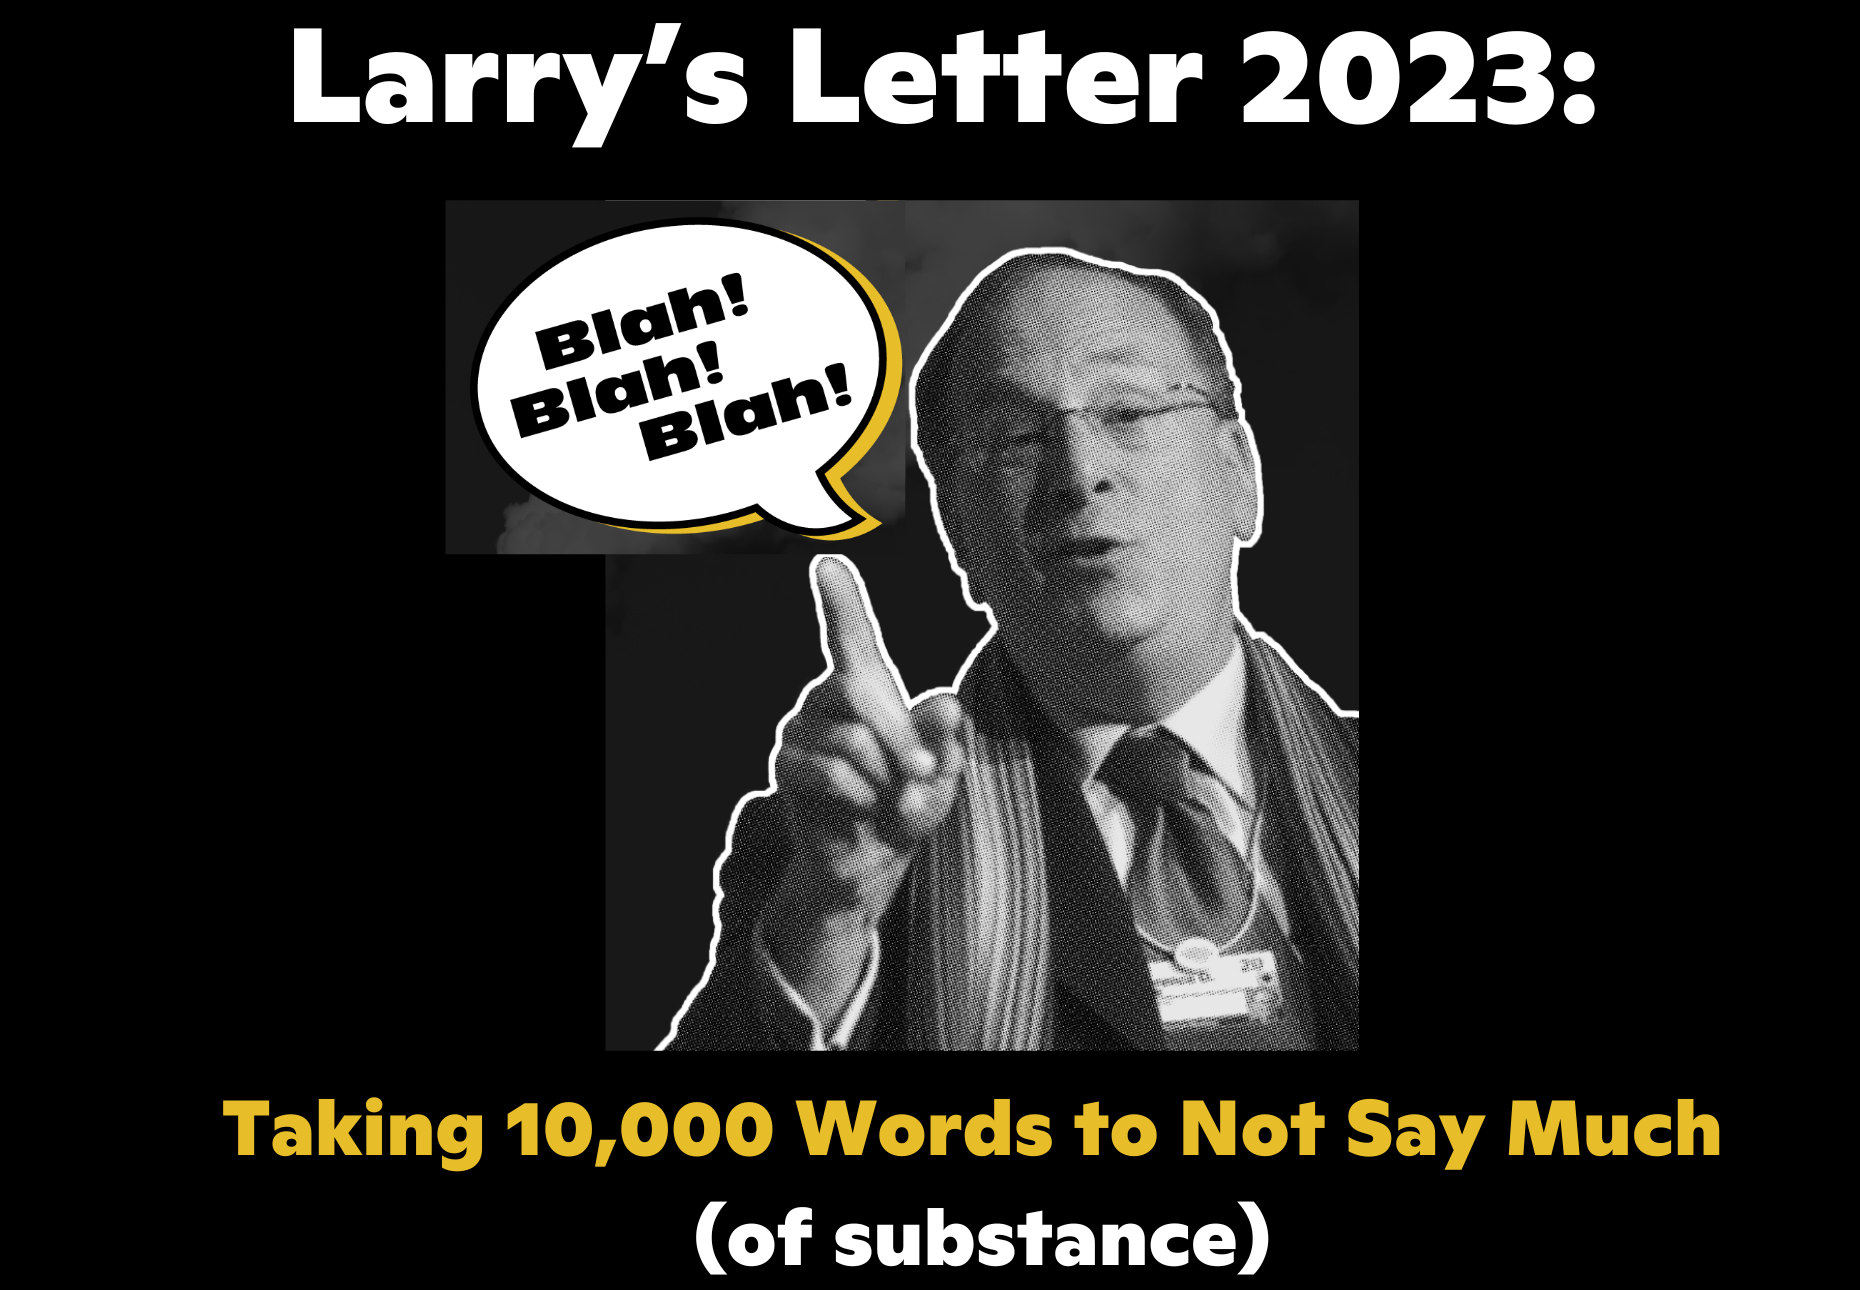 A black and white cut out graphic photo of Larry Fink with his finger raised with a speech bubble "blah blah blah" The text above and below reads "Larry's letter 2023, Taking 10,000 Words to Not Say Much (of substance)"